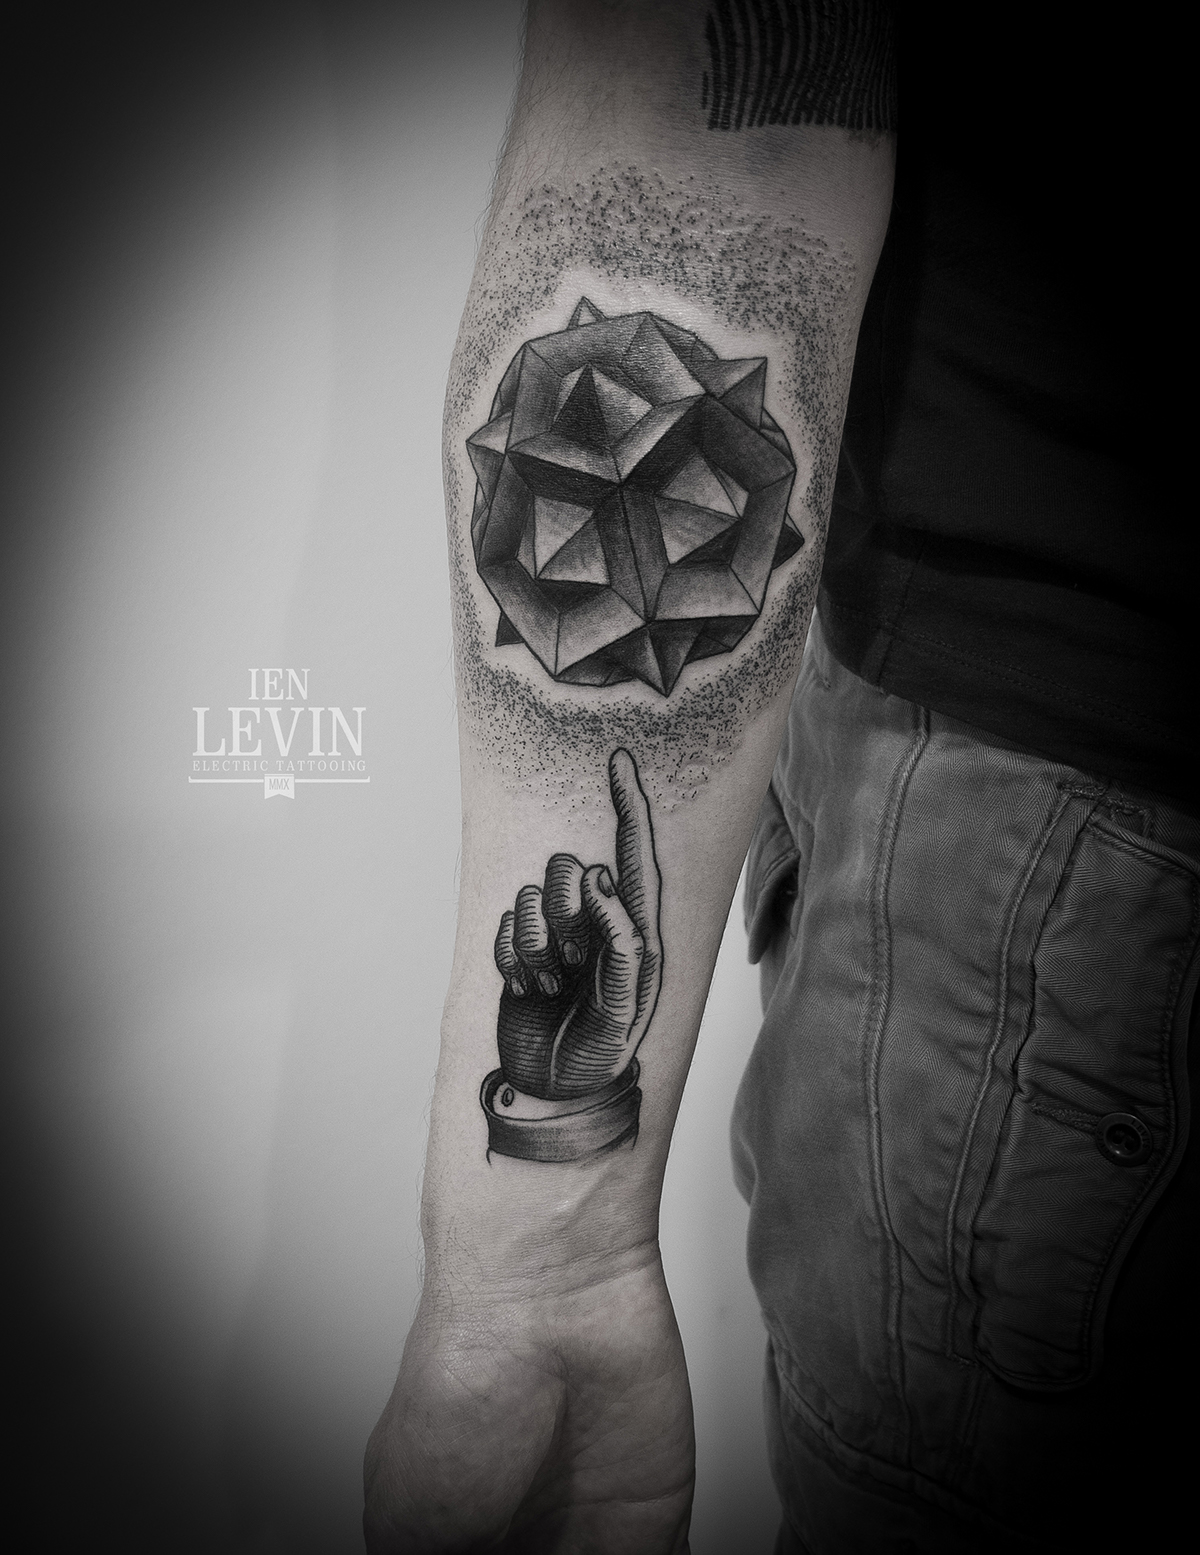 tattoo ienlevin levin lineart dotwork graphic etching engraving blackwork masonic occult symbolism sacred geometry satanic science